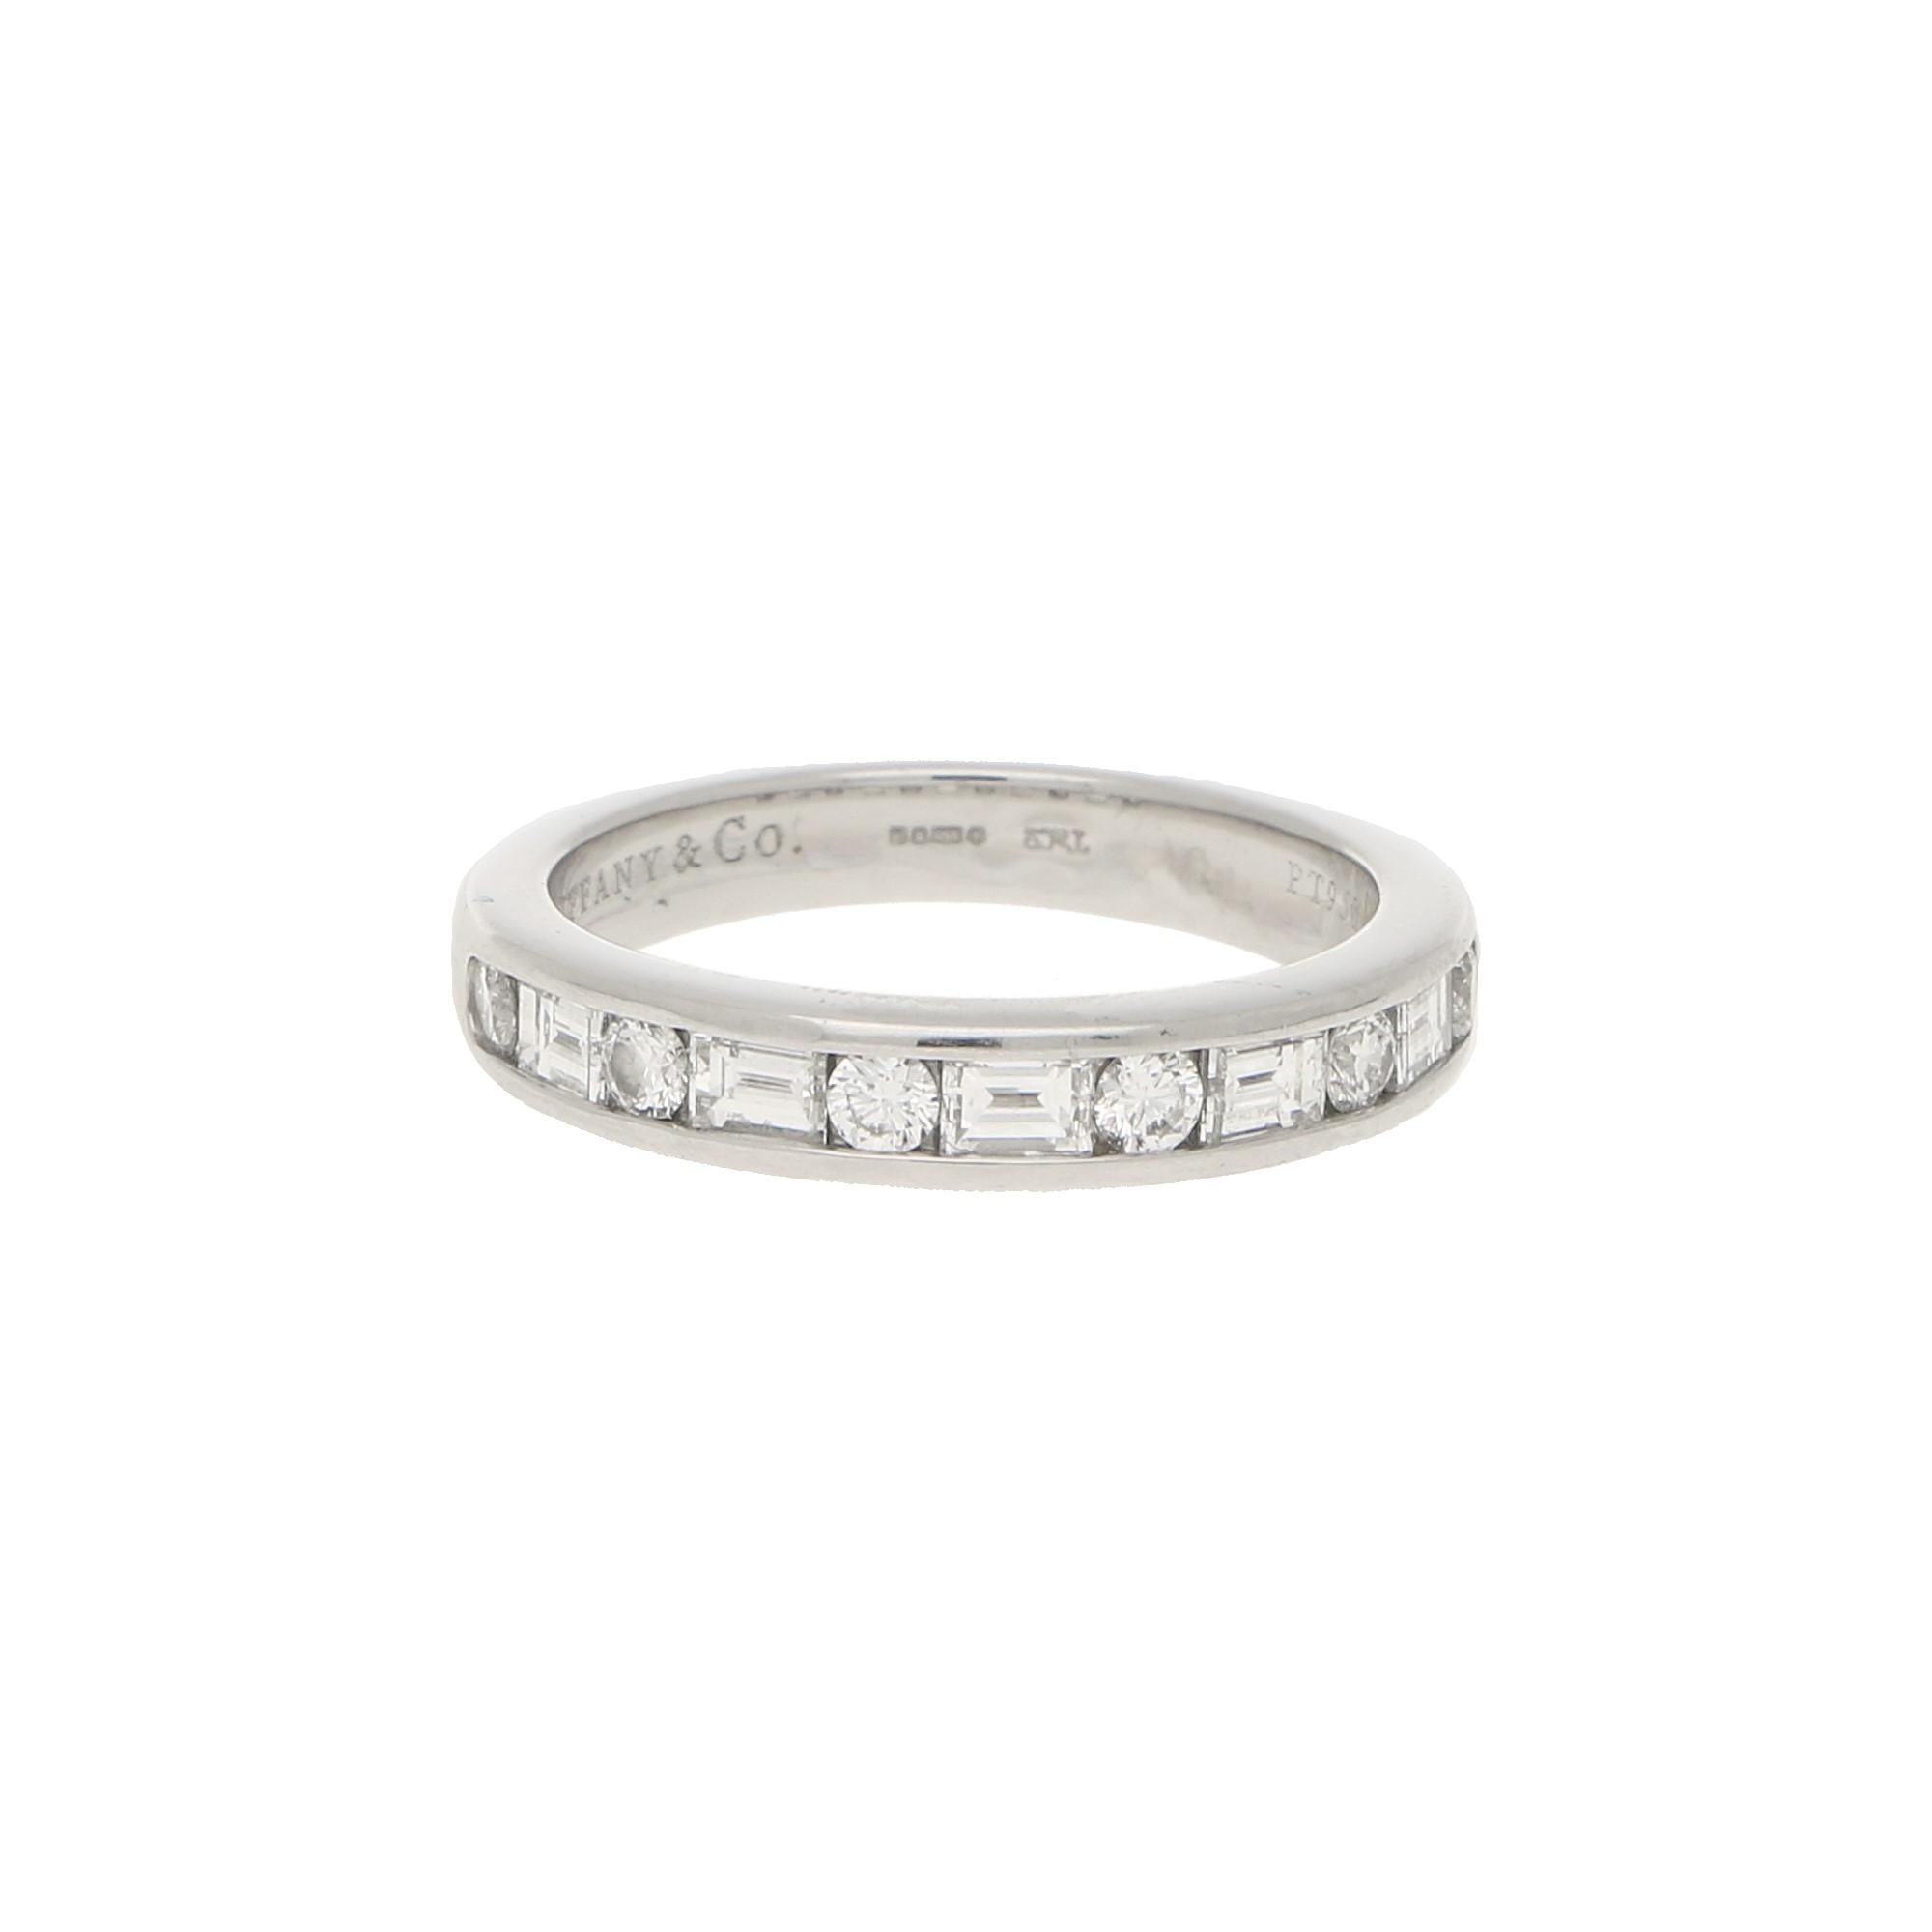 A lovely signed Tiffany & Co. diamond half eternity ring set in platinum.

The ring is set with exactly 11 sparkly diamonds, six of which being round brilliant cuts and the rest being baguette cut diamonds. All of which are rubover set perfectly